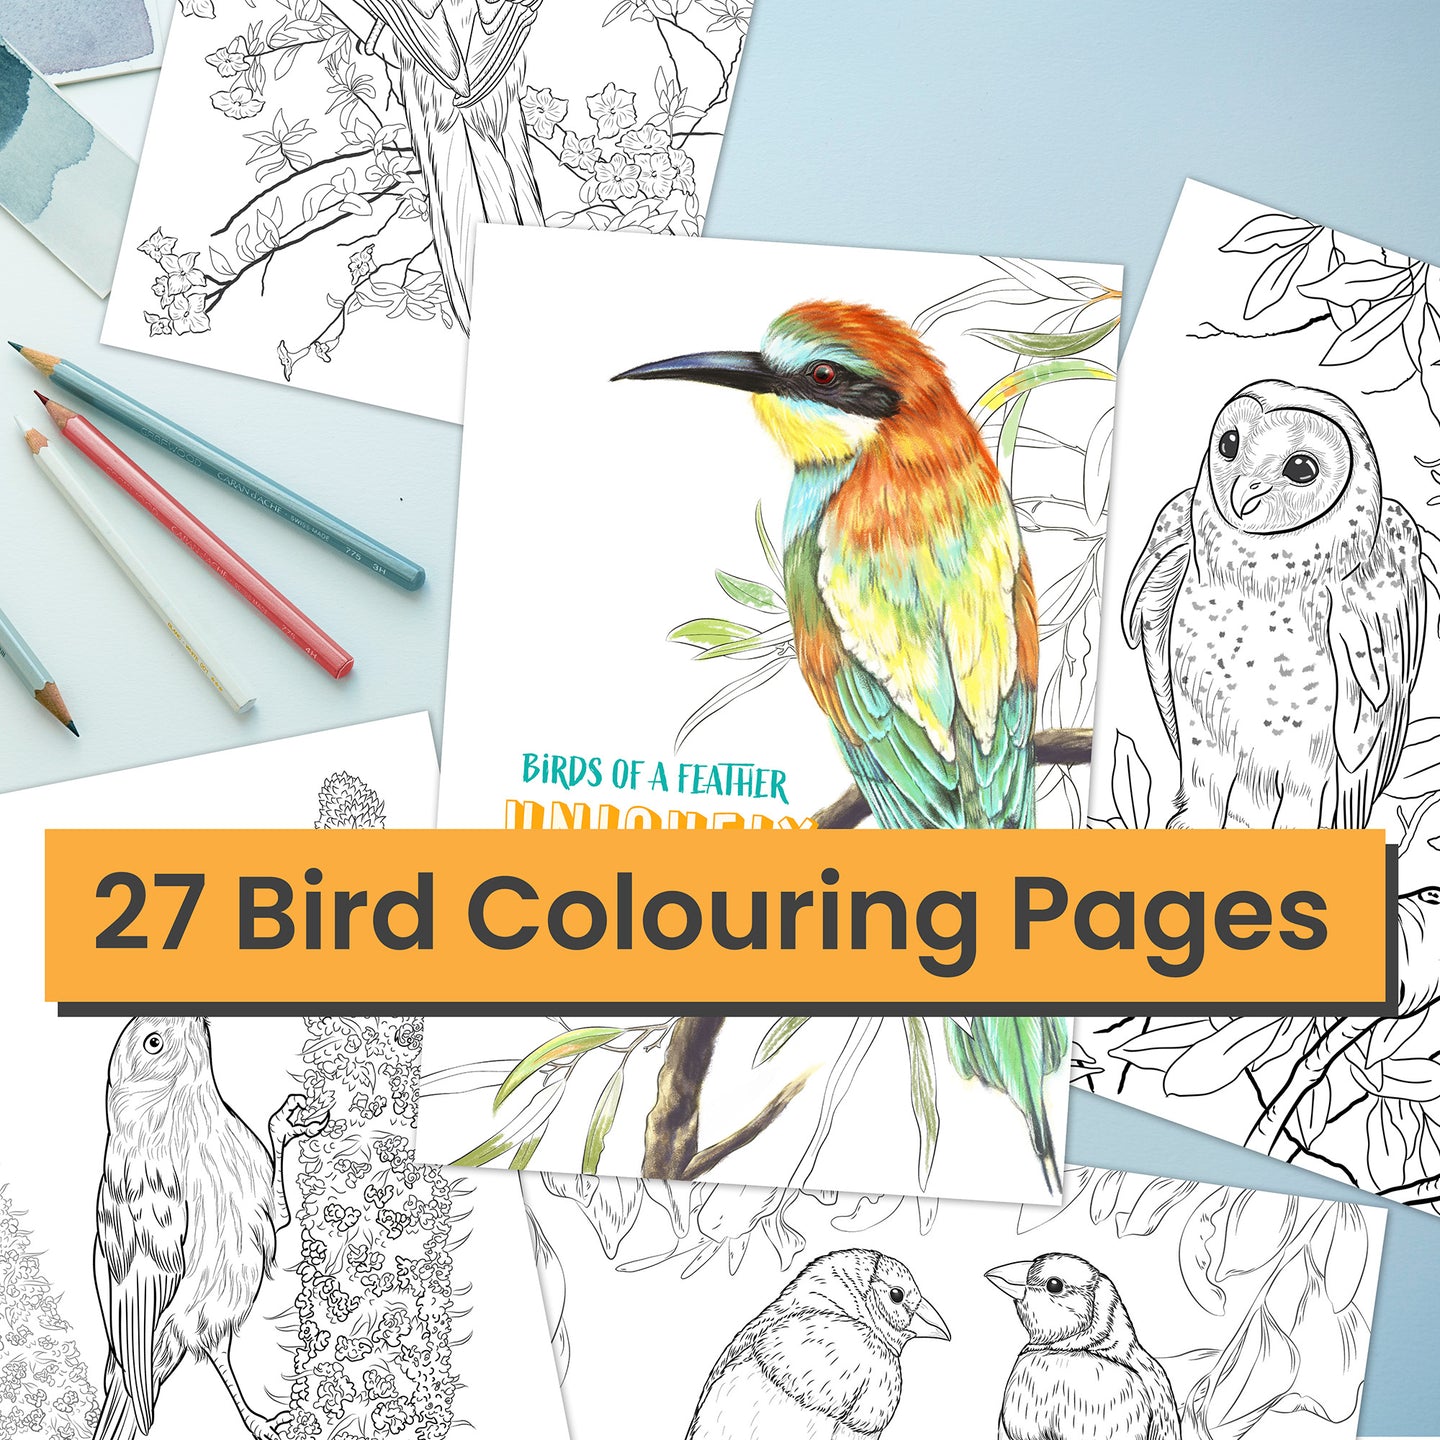 Elegant & Intricate Bird Colouring In Pages